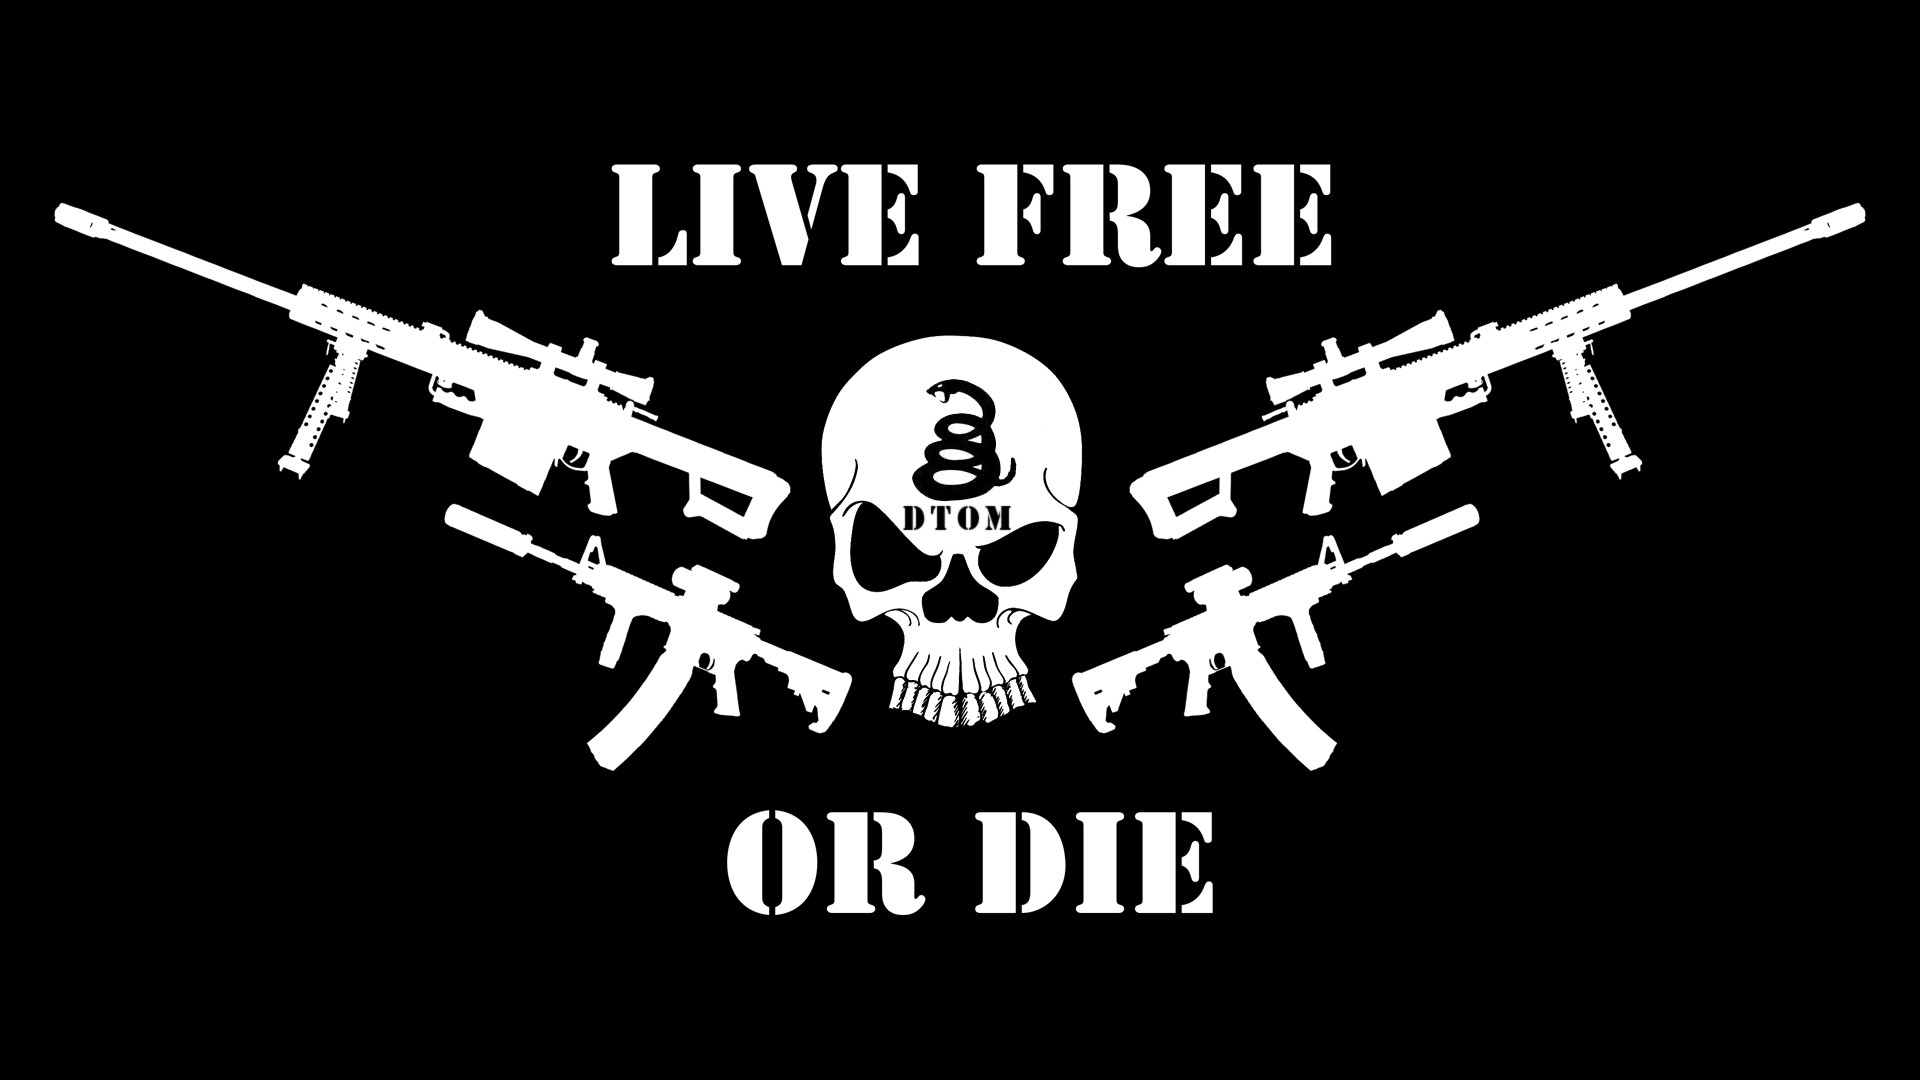 1920x1080 ... Live Free Don't Tread On Me by justo23